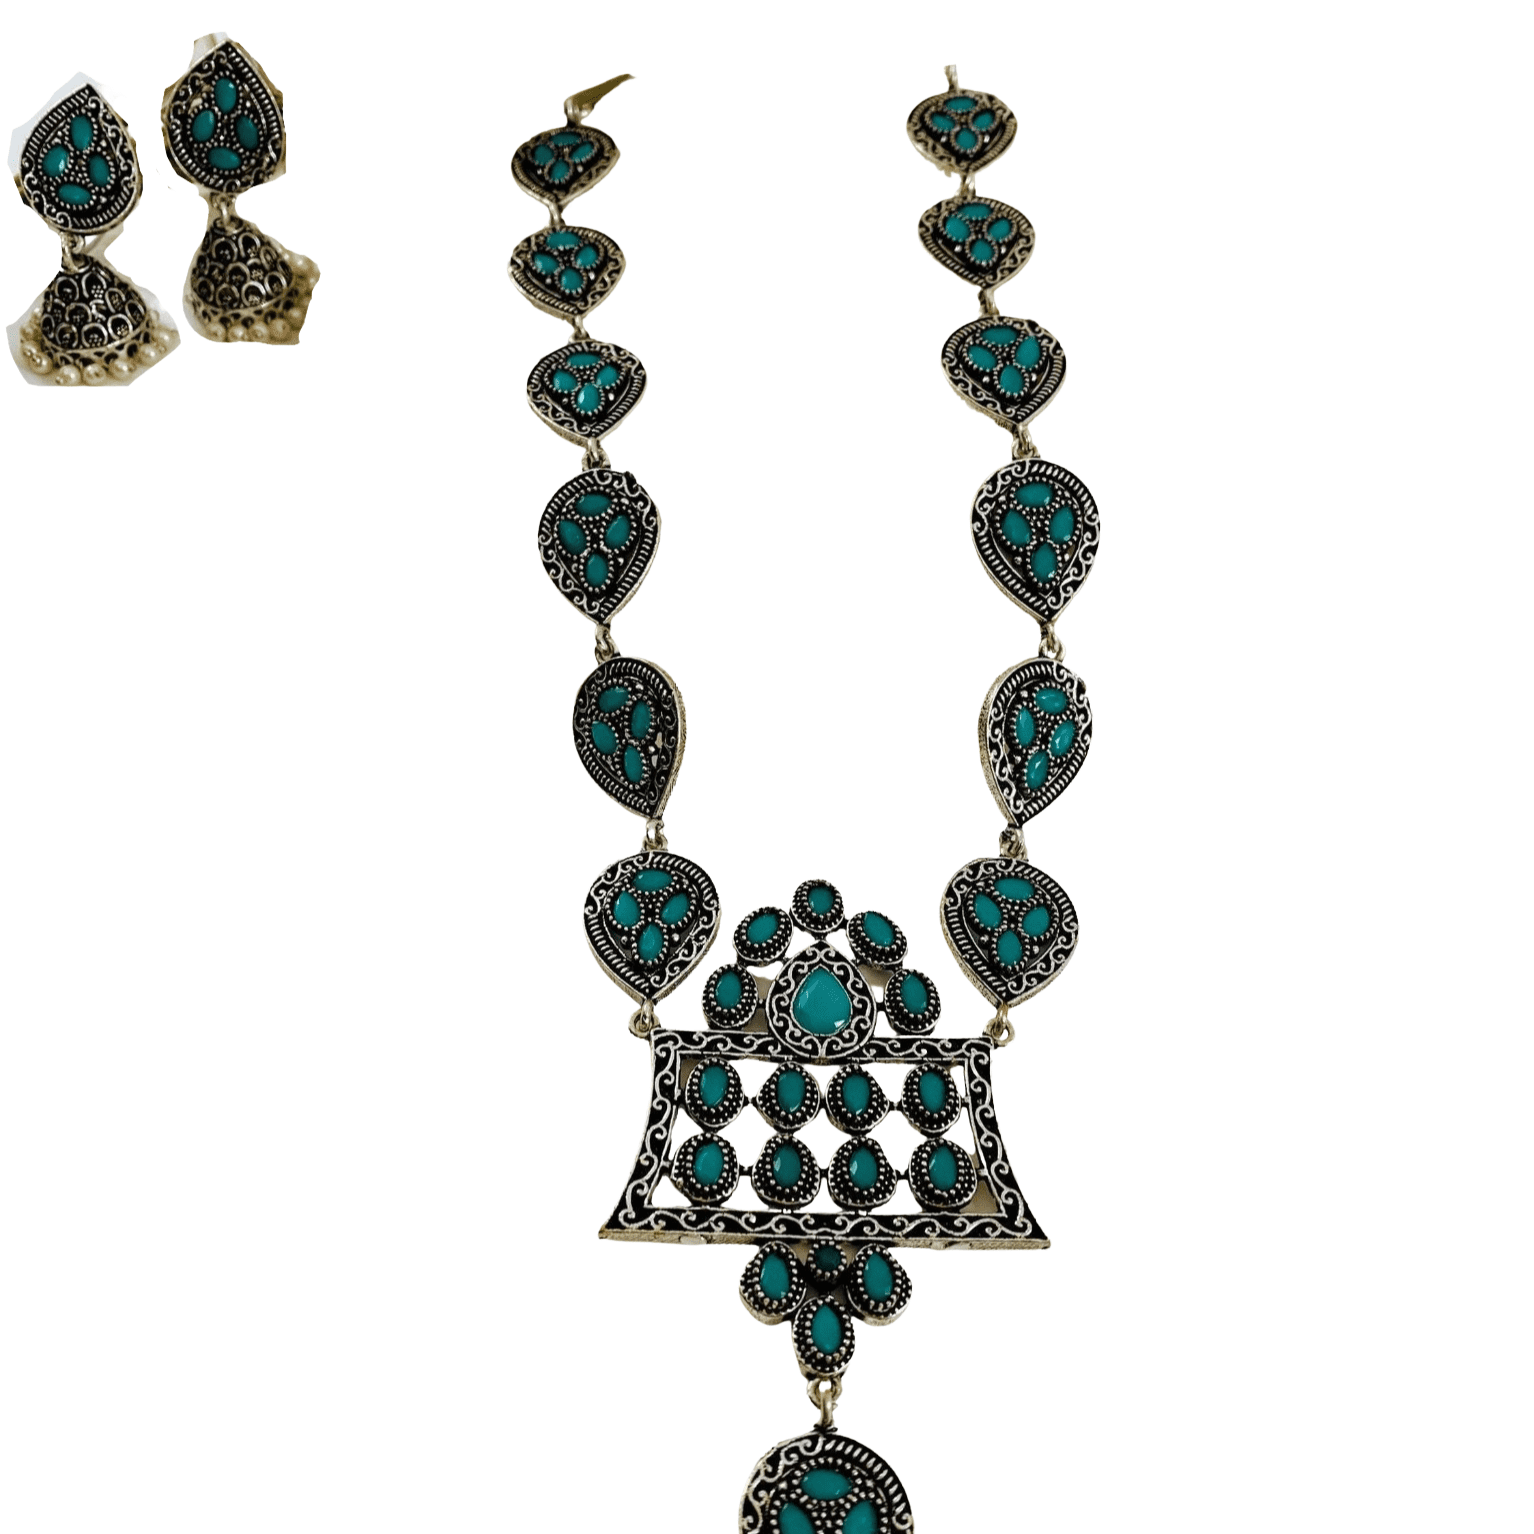 Details about   Indian Jewelry Necklace set Bollywood Ethnic Gold Plated Party Wear Set 